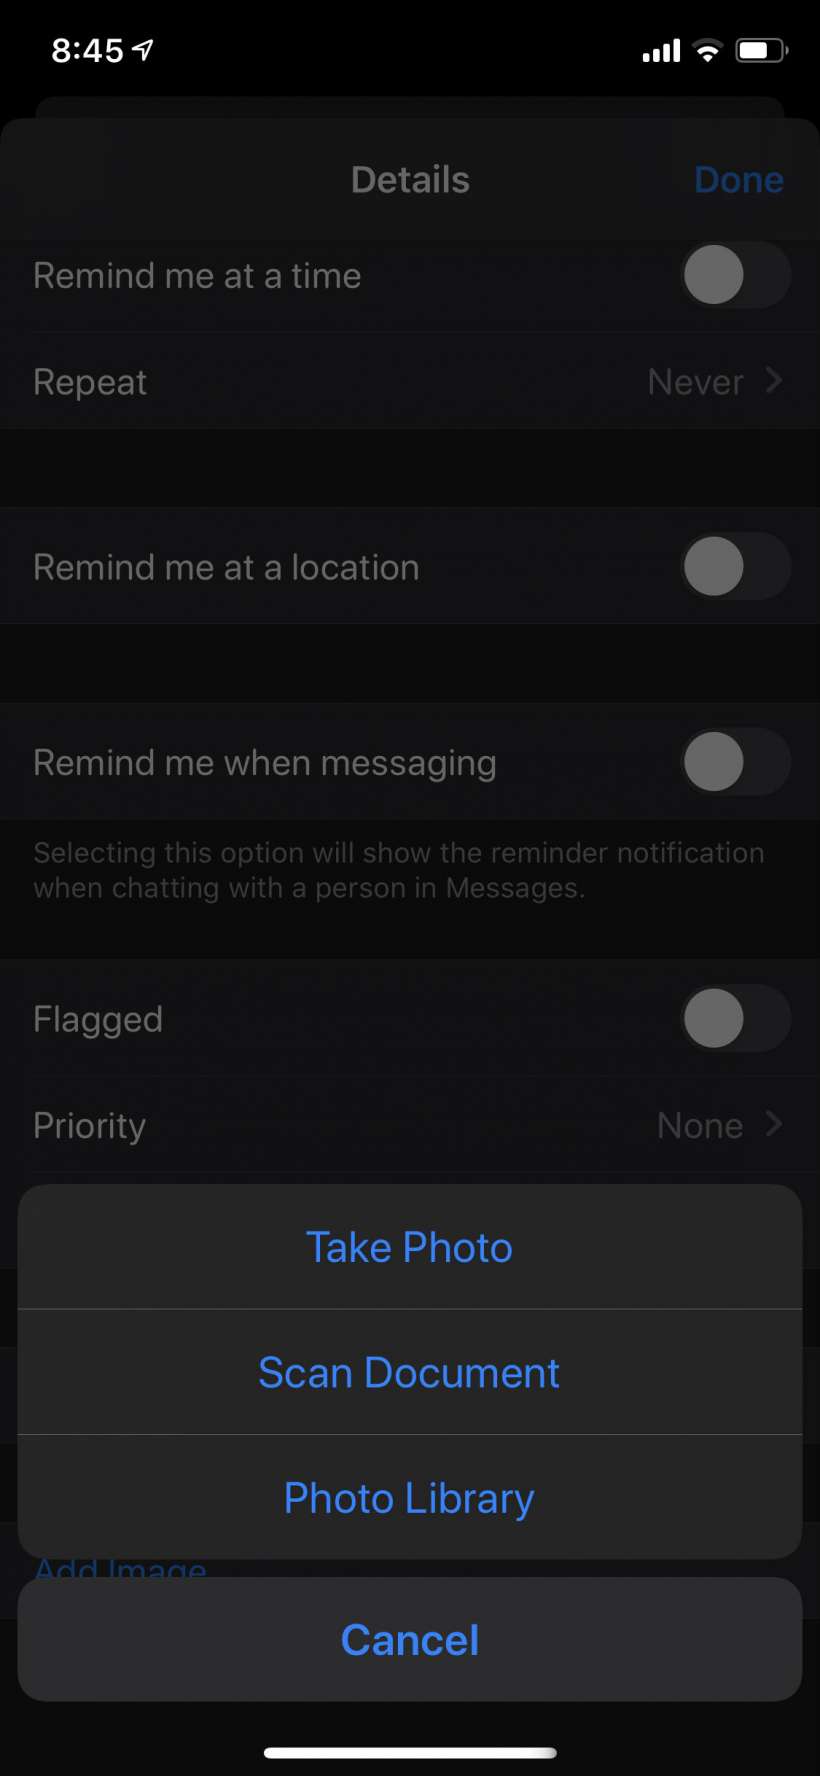 How to attach photos and scanned documents to your Reminders on iPhone and iPad.